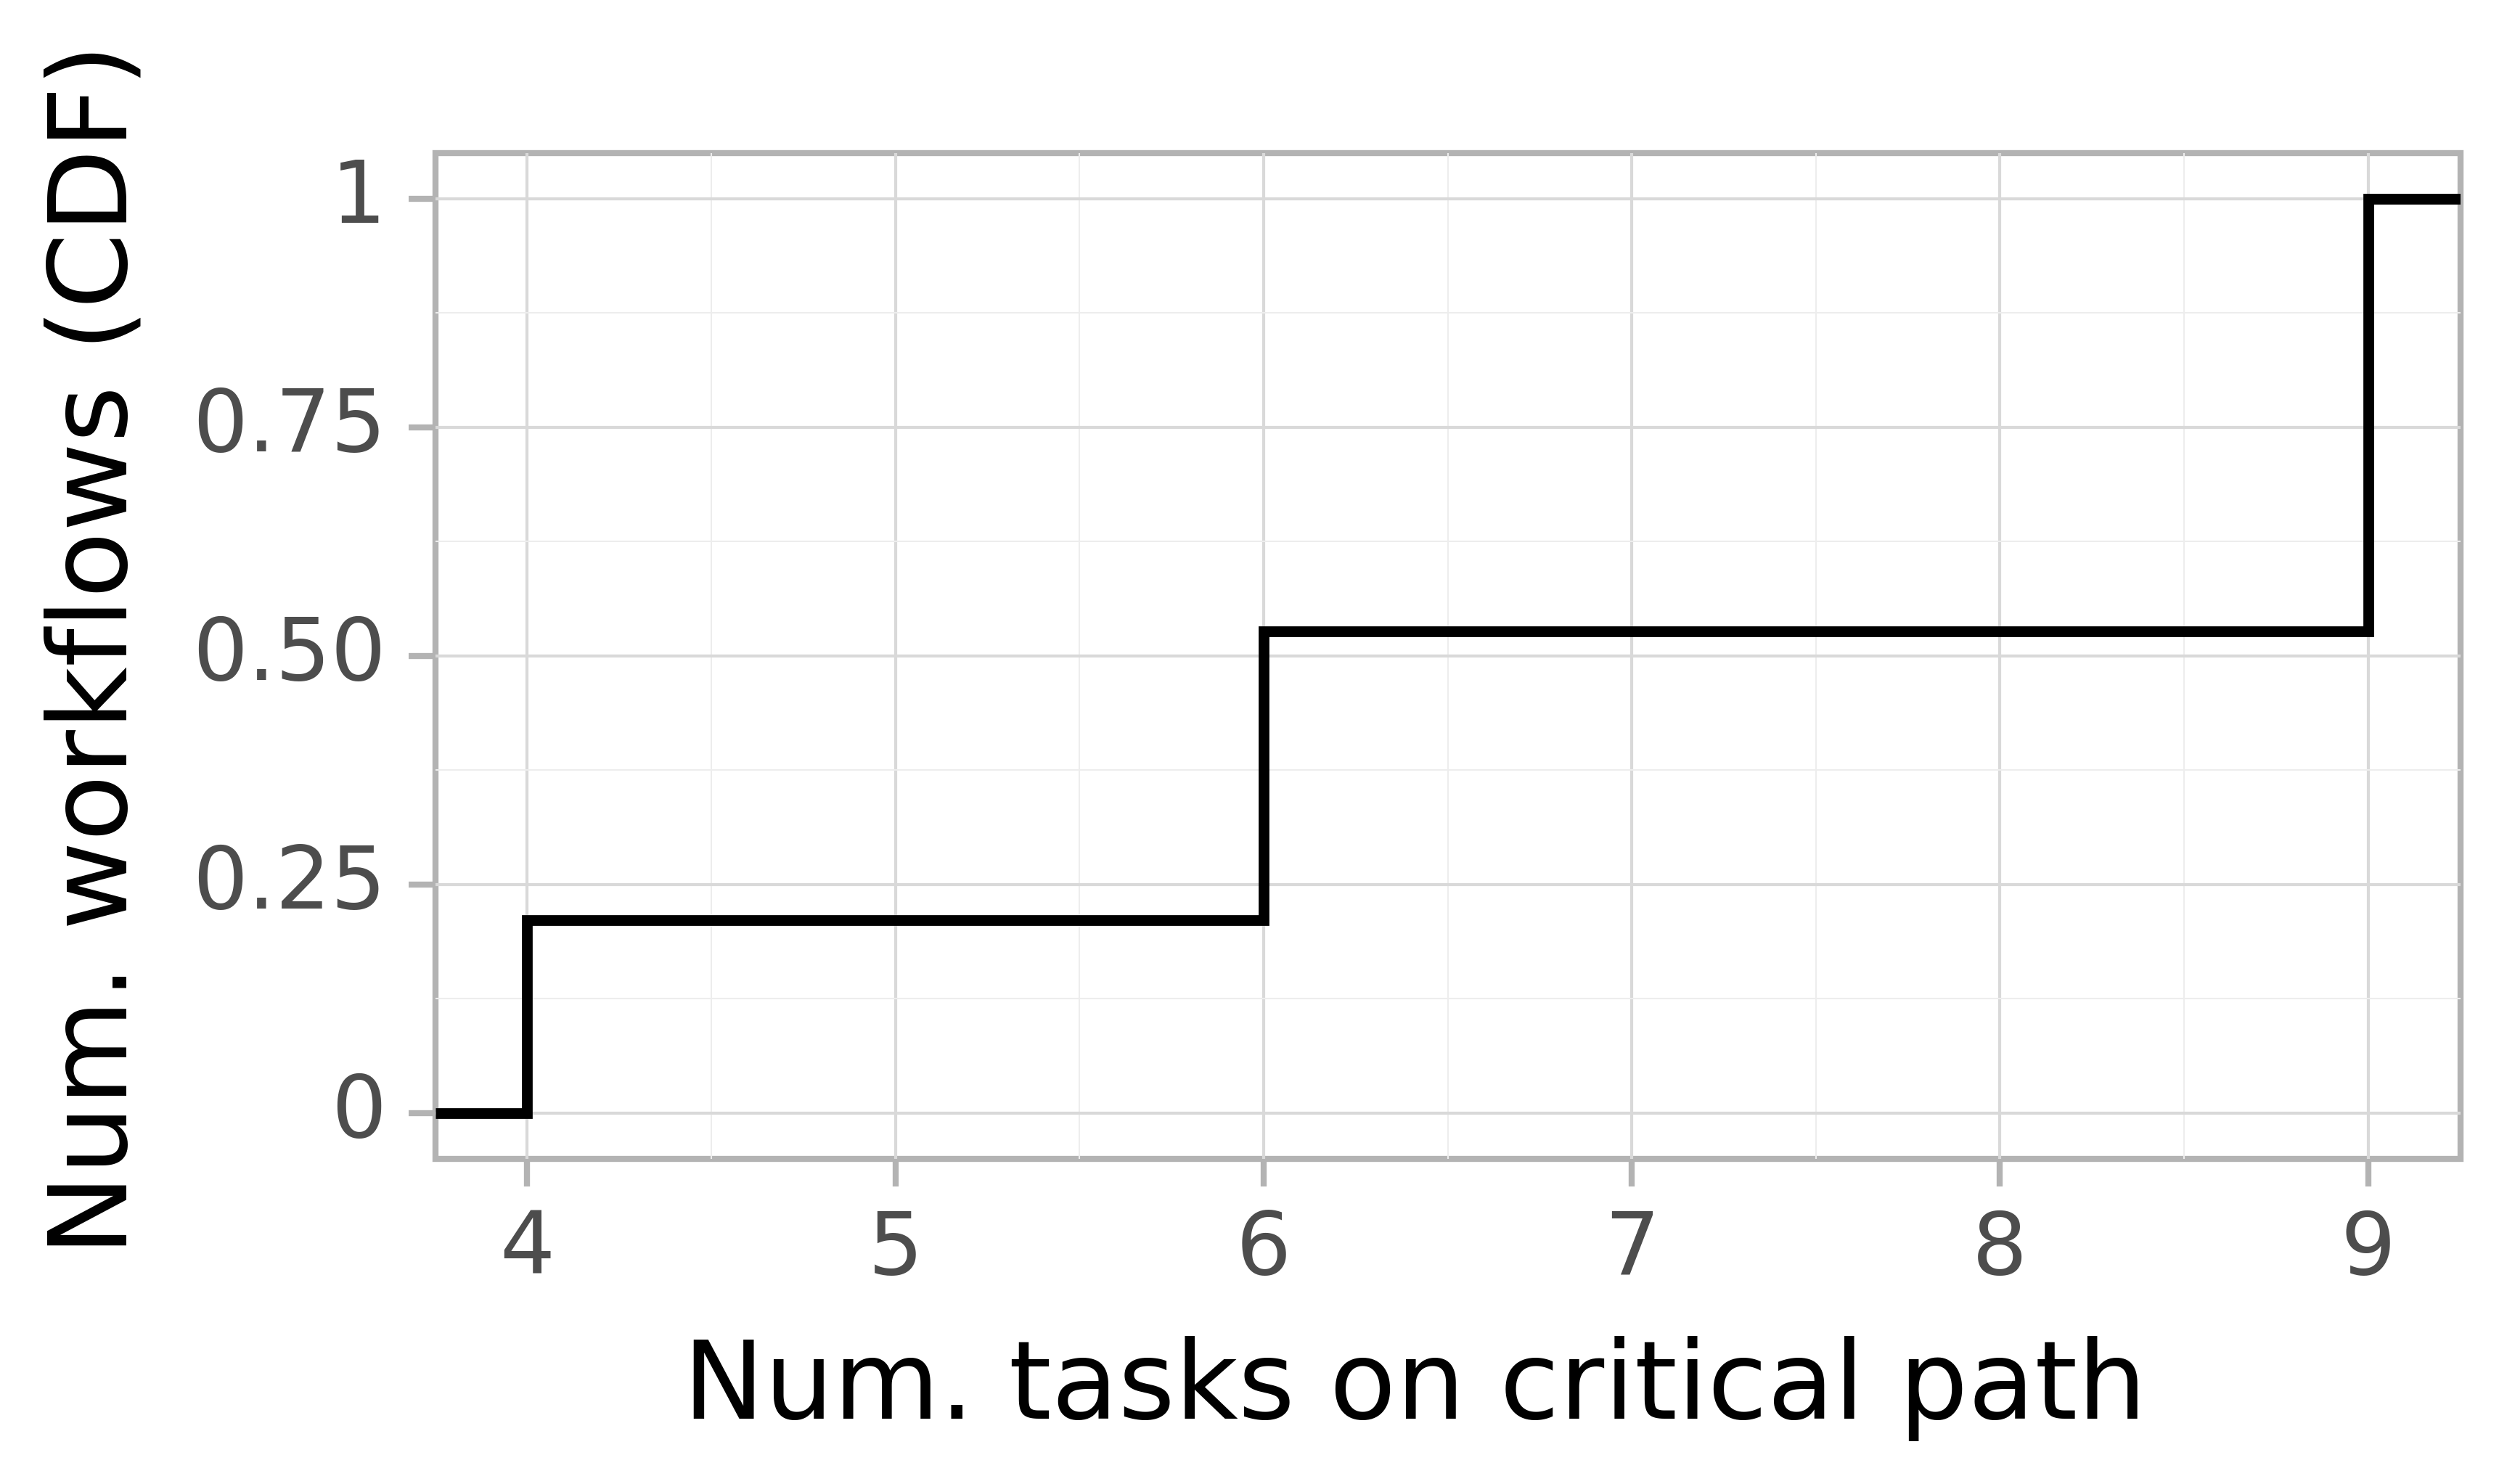 Job critical path task count graph for the spec_trace-2 trace.